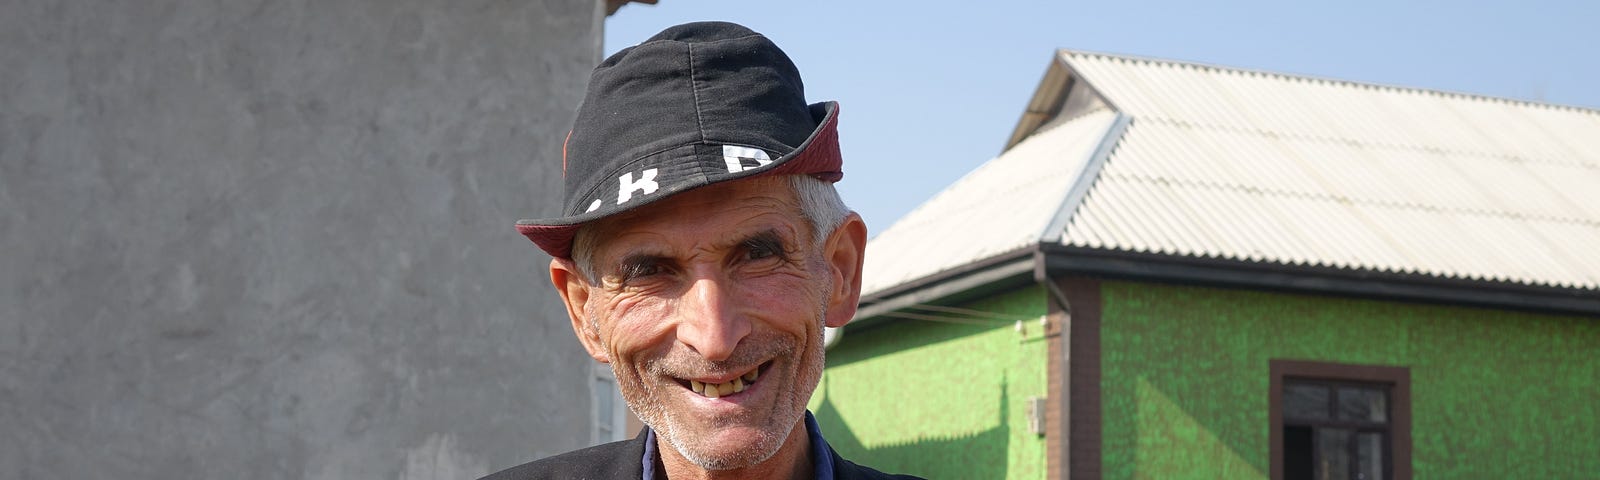 A older man with a wide smile and wearing a sharp black hat poses for a photo in front of his home.